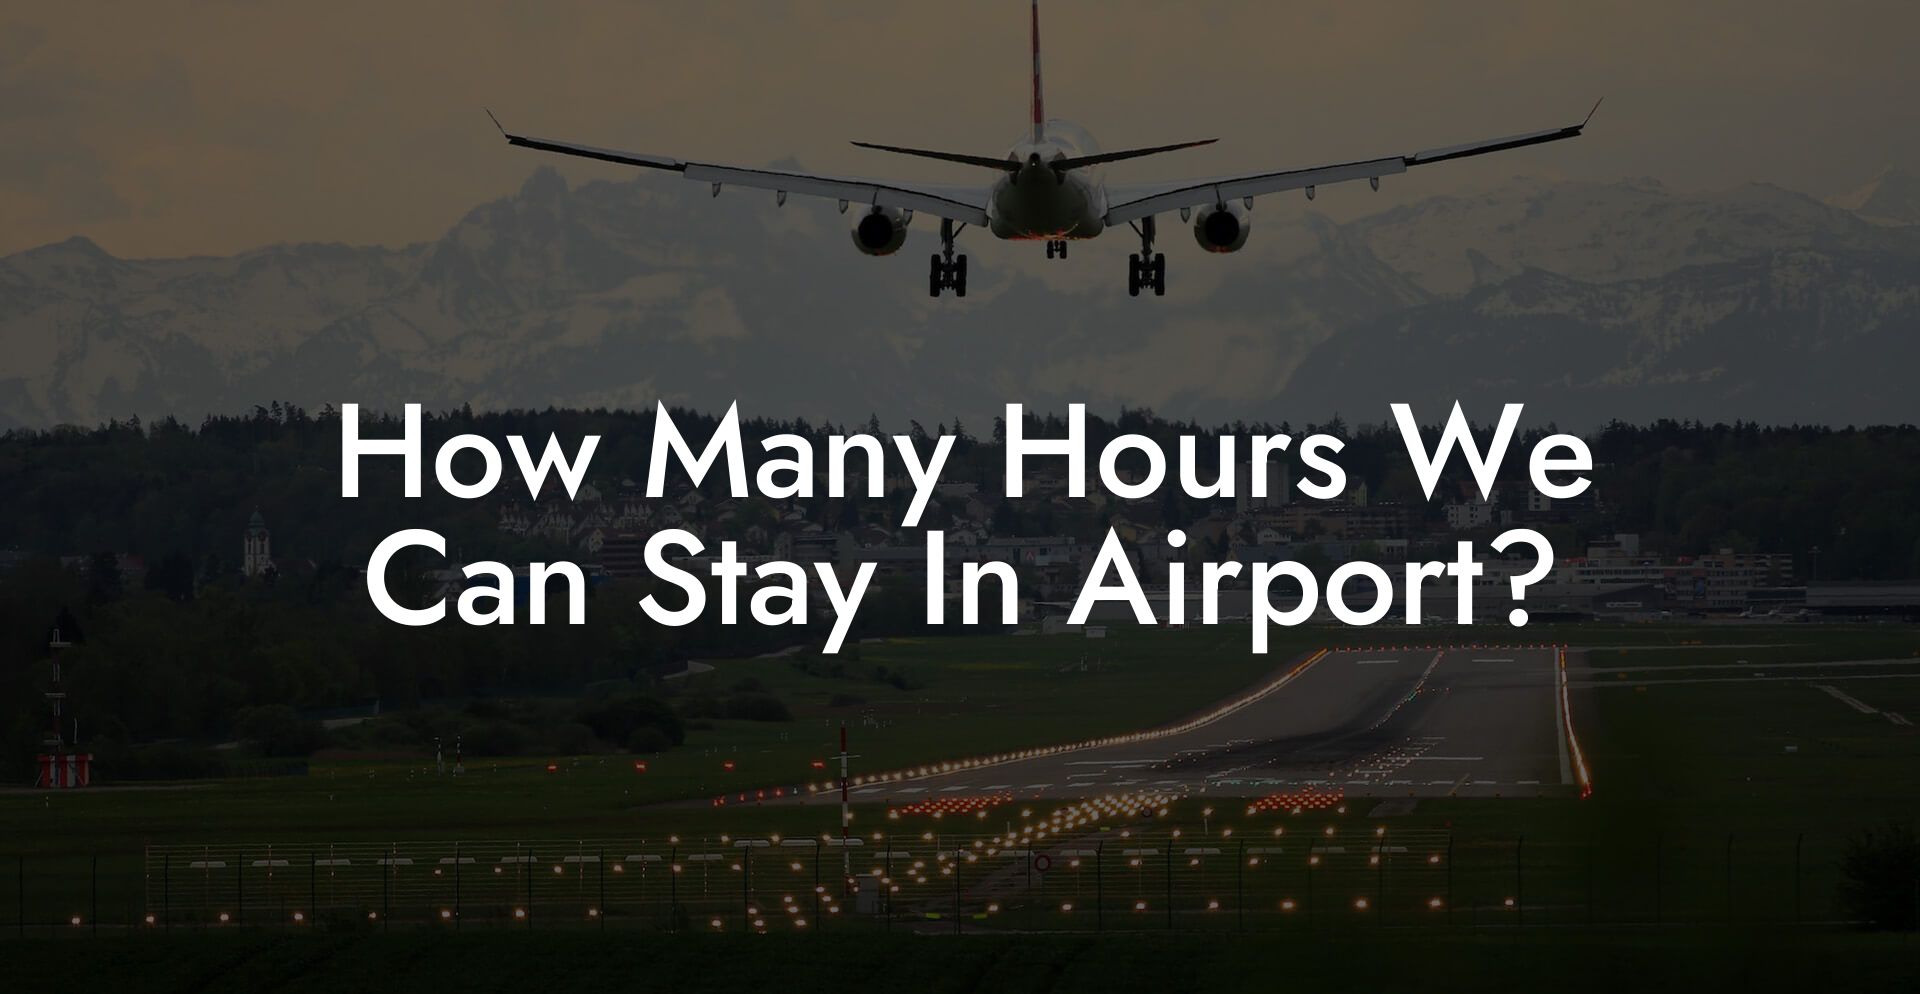 How Many Hours We Can Stay In Airport?